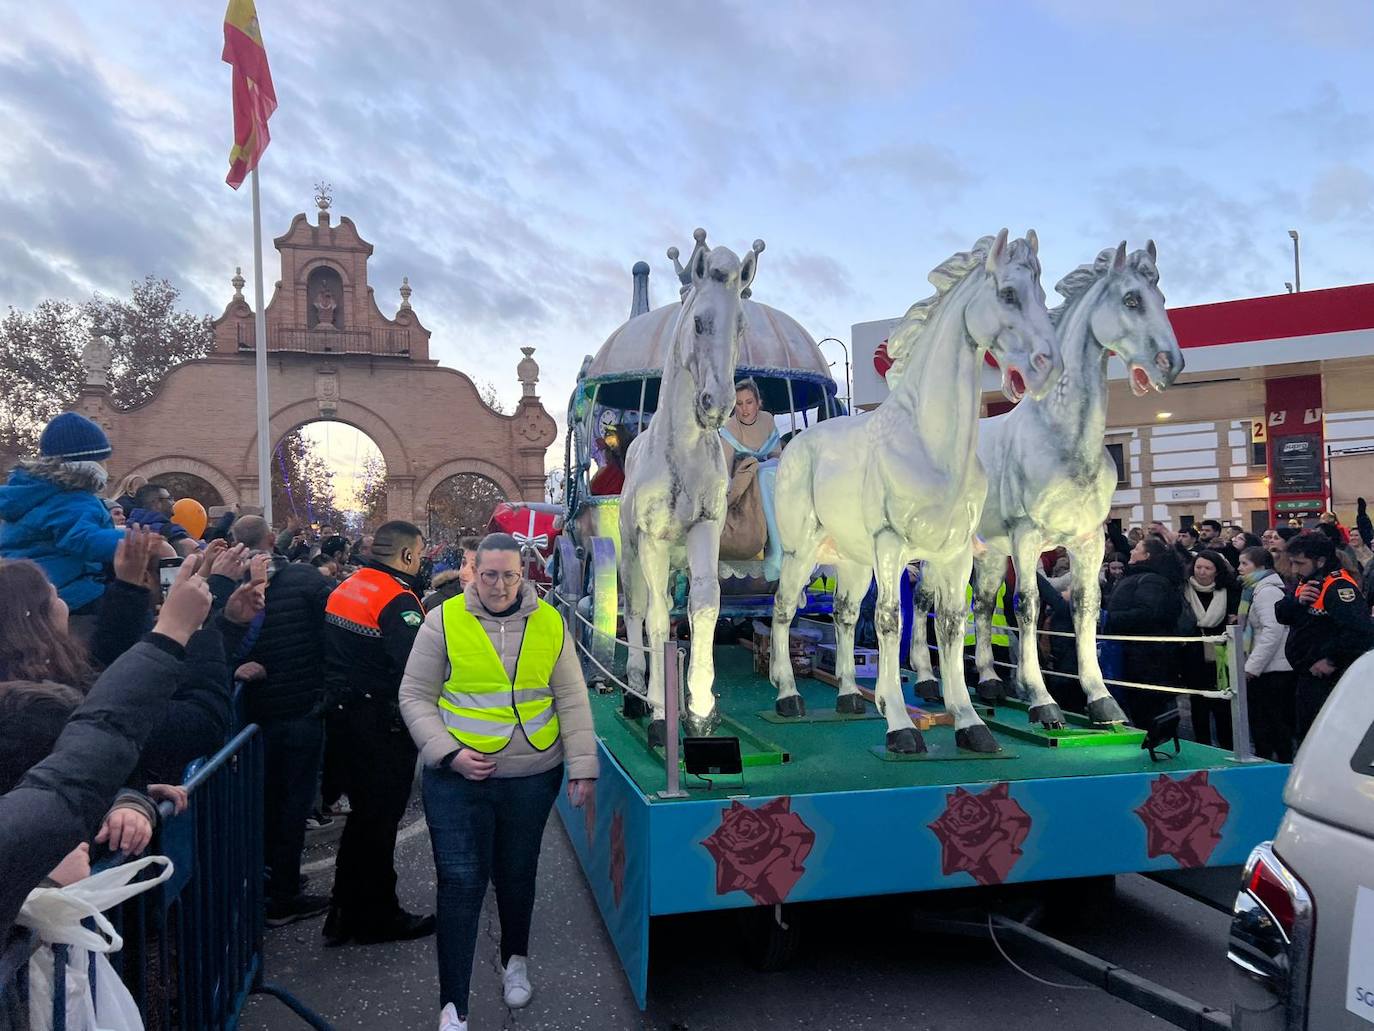 The Kings parade in Antequera.